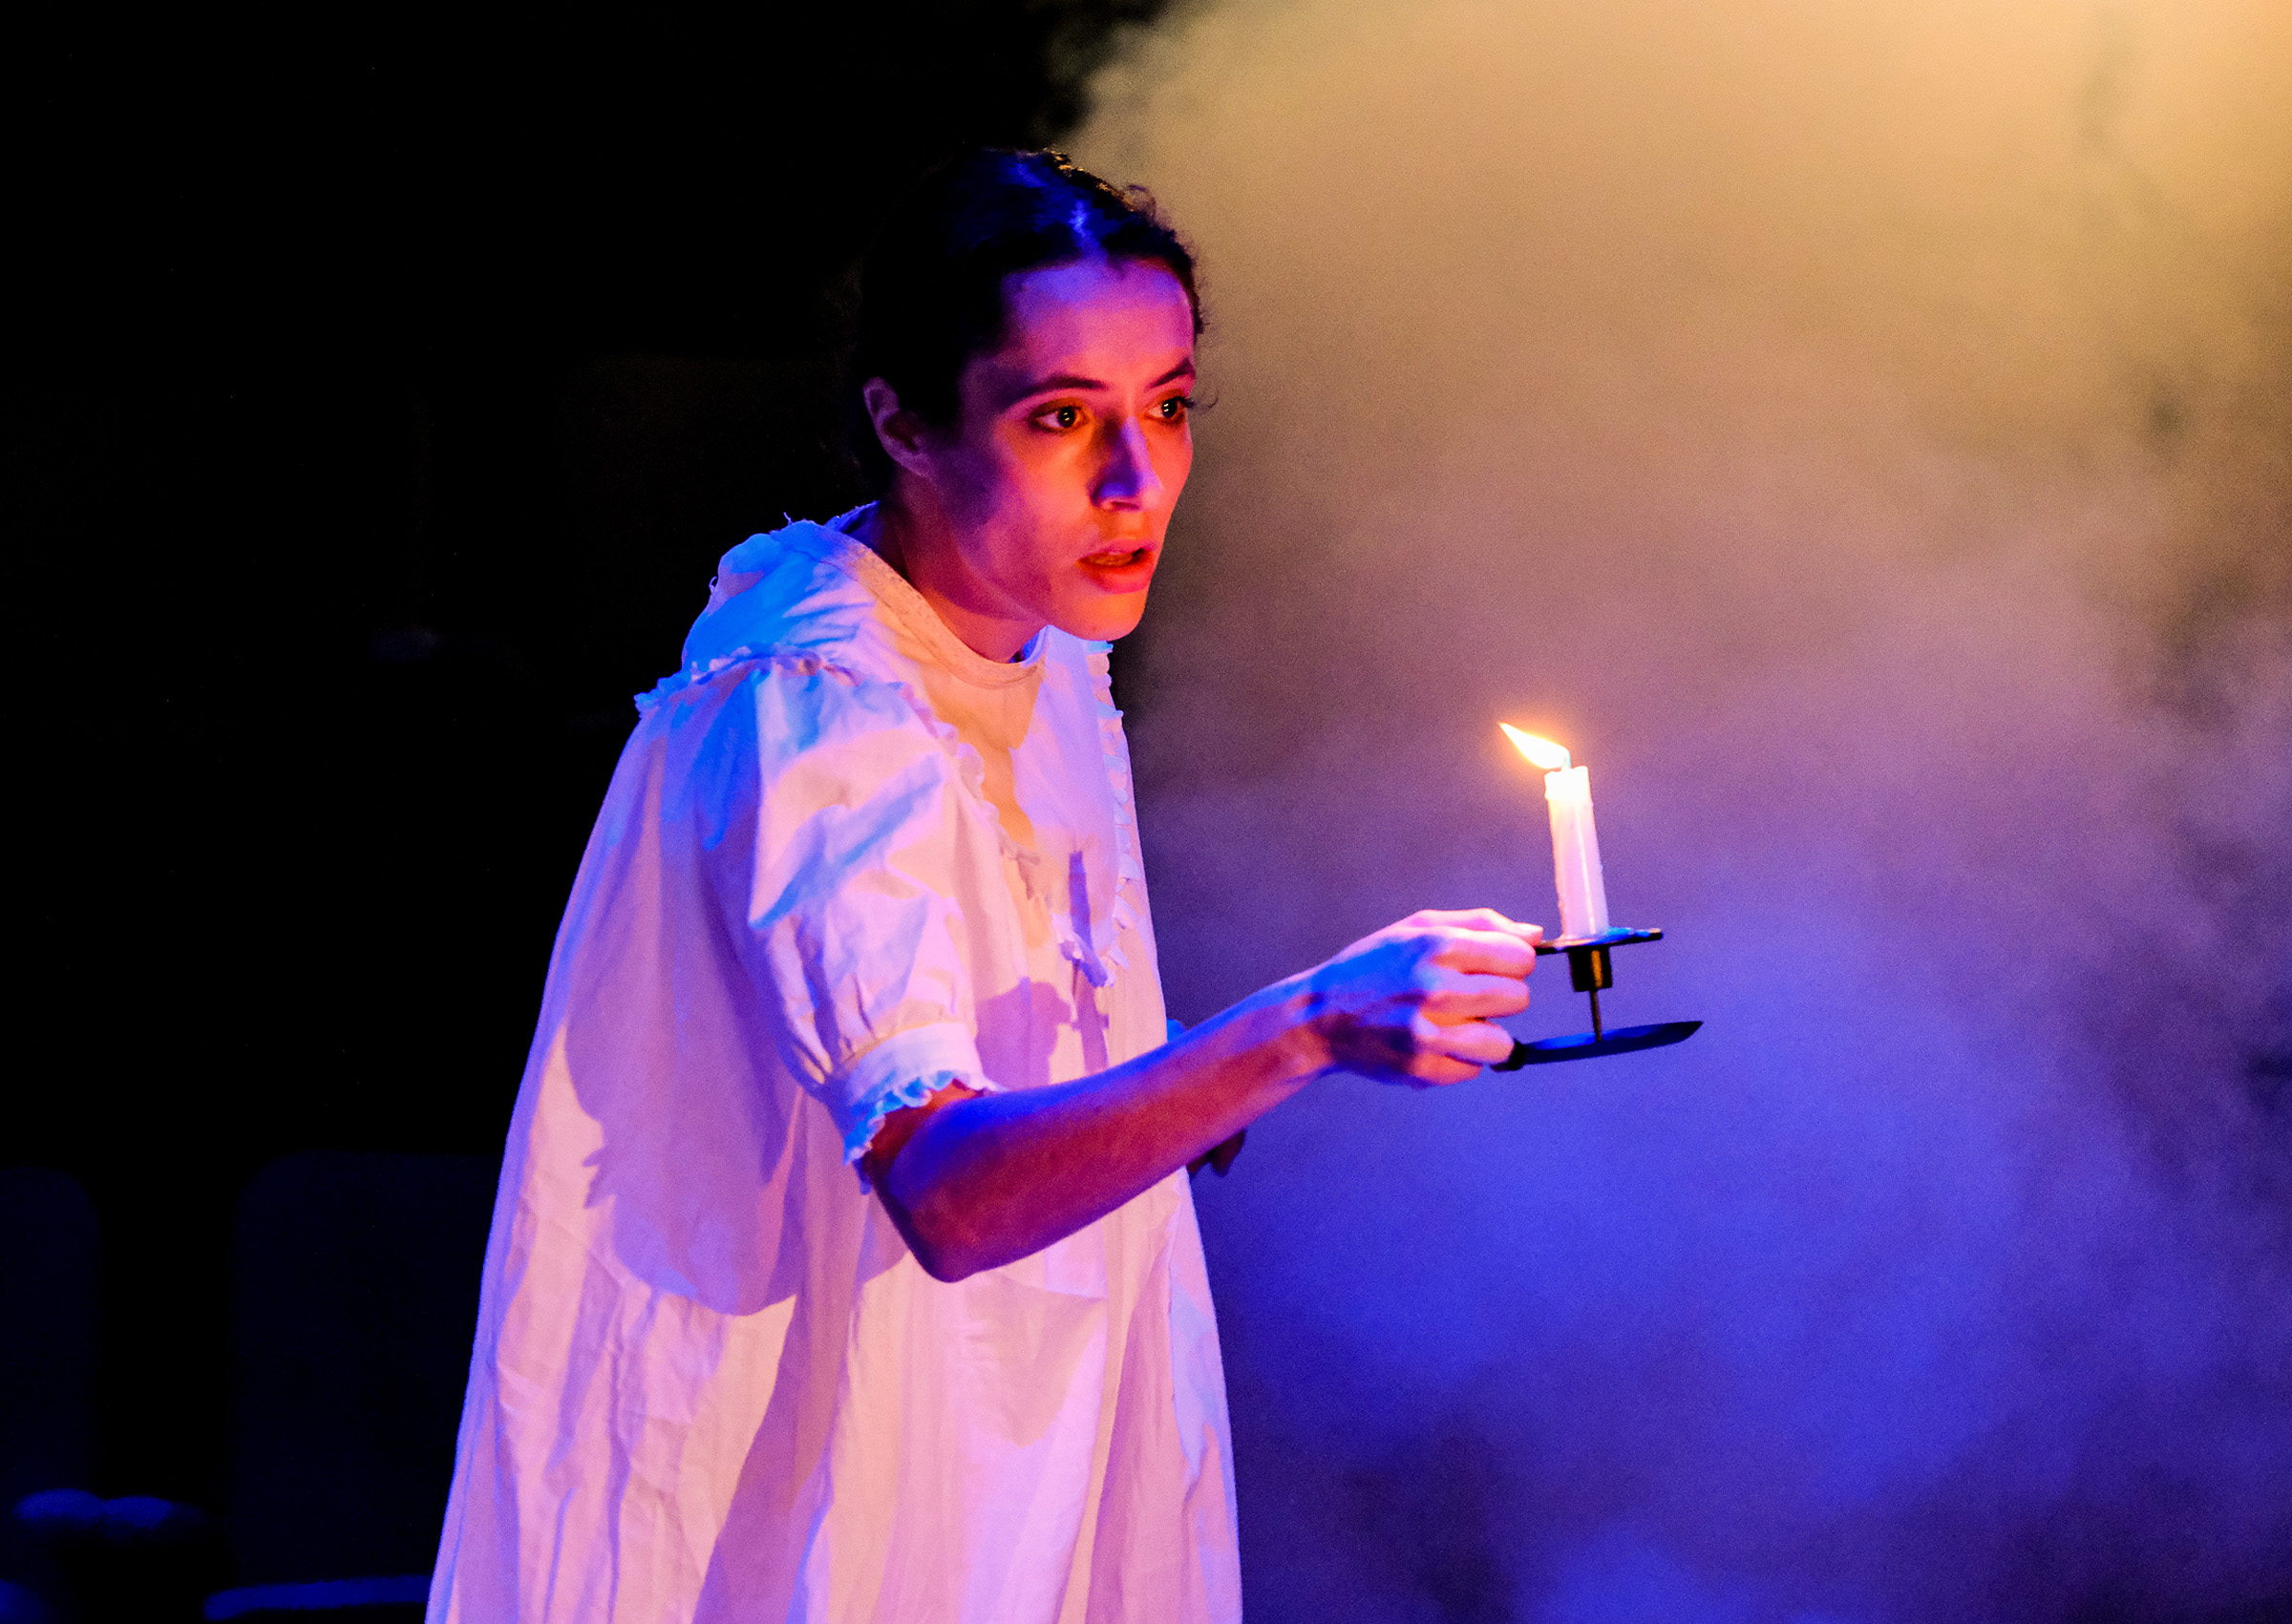 theatre performance image: Jane Eyre in a nightdress, holding a candle with smoke in the background